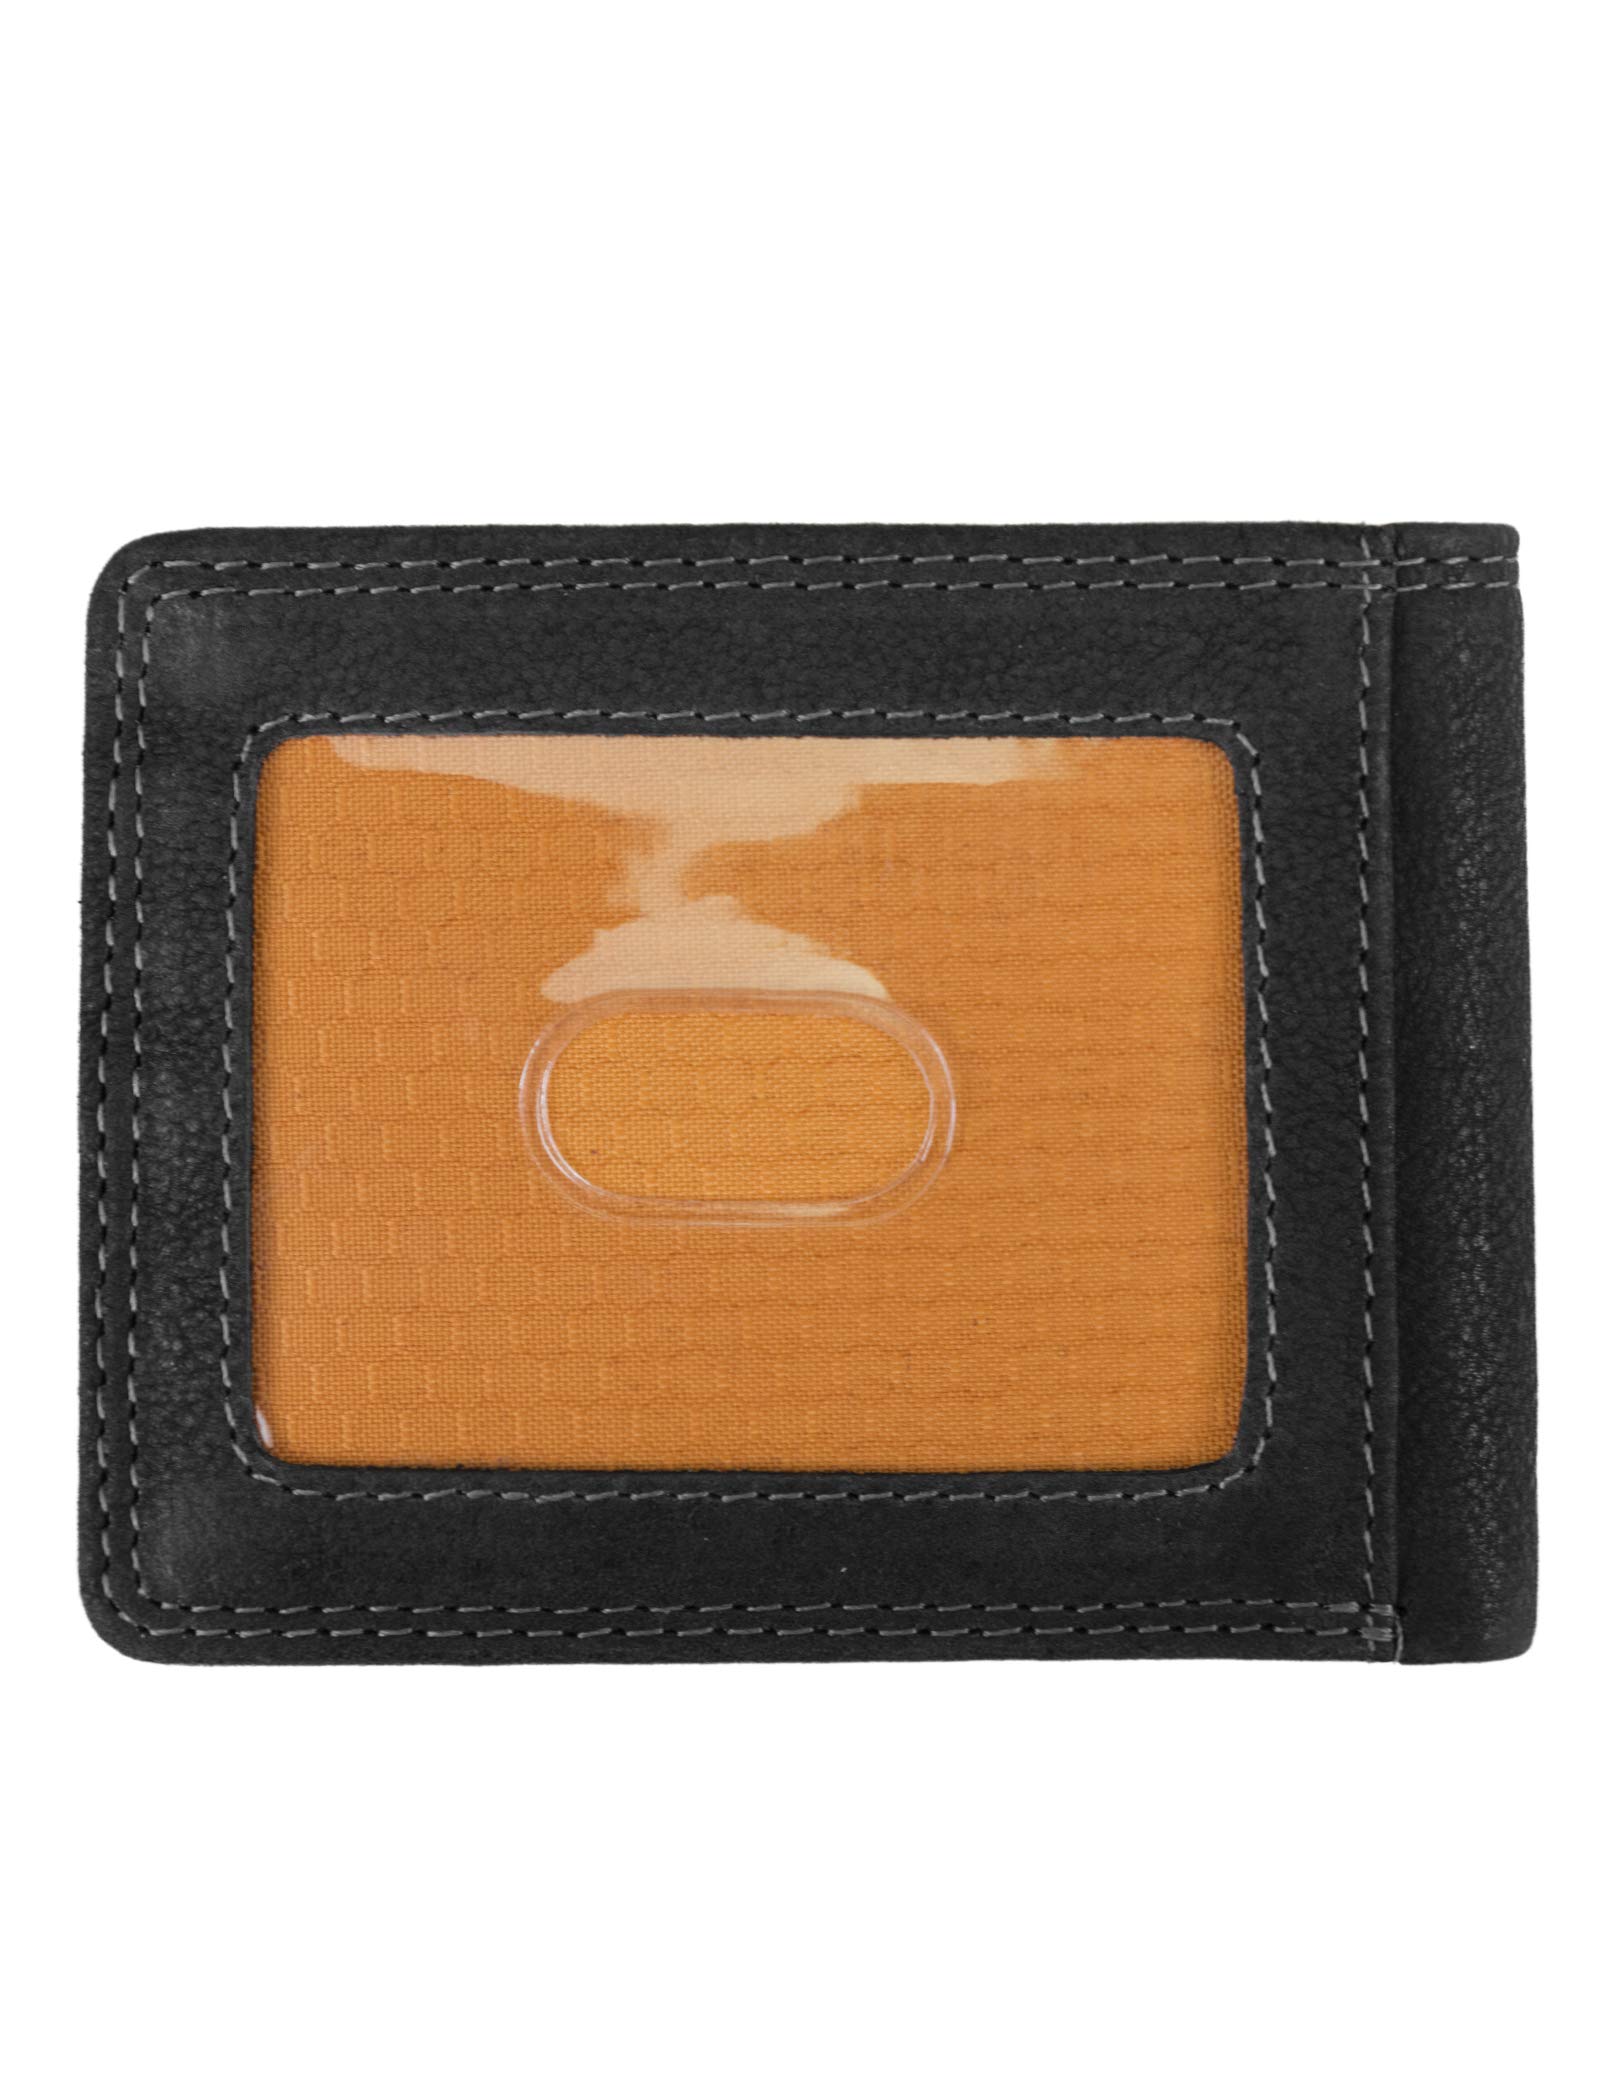 Timberland PRO Men's Slim Leather RFID Bifold Wallet with Back ID Window